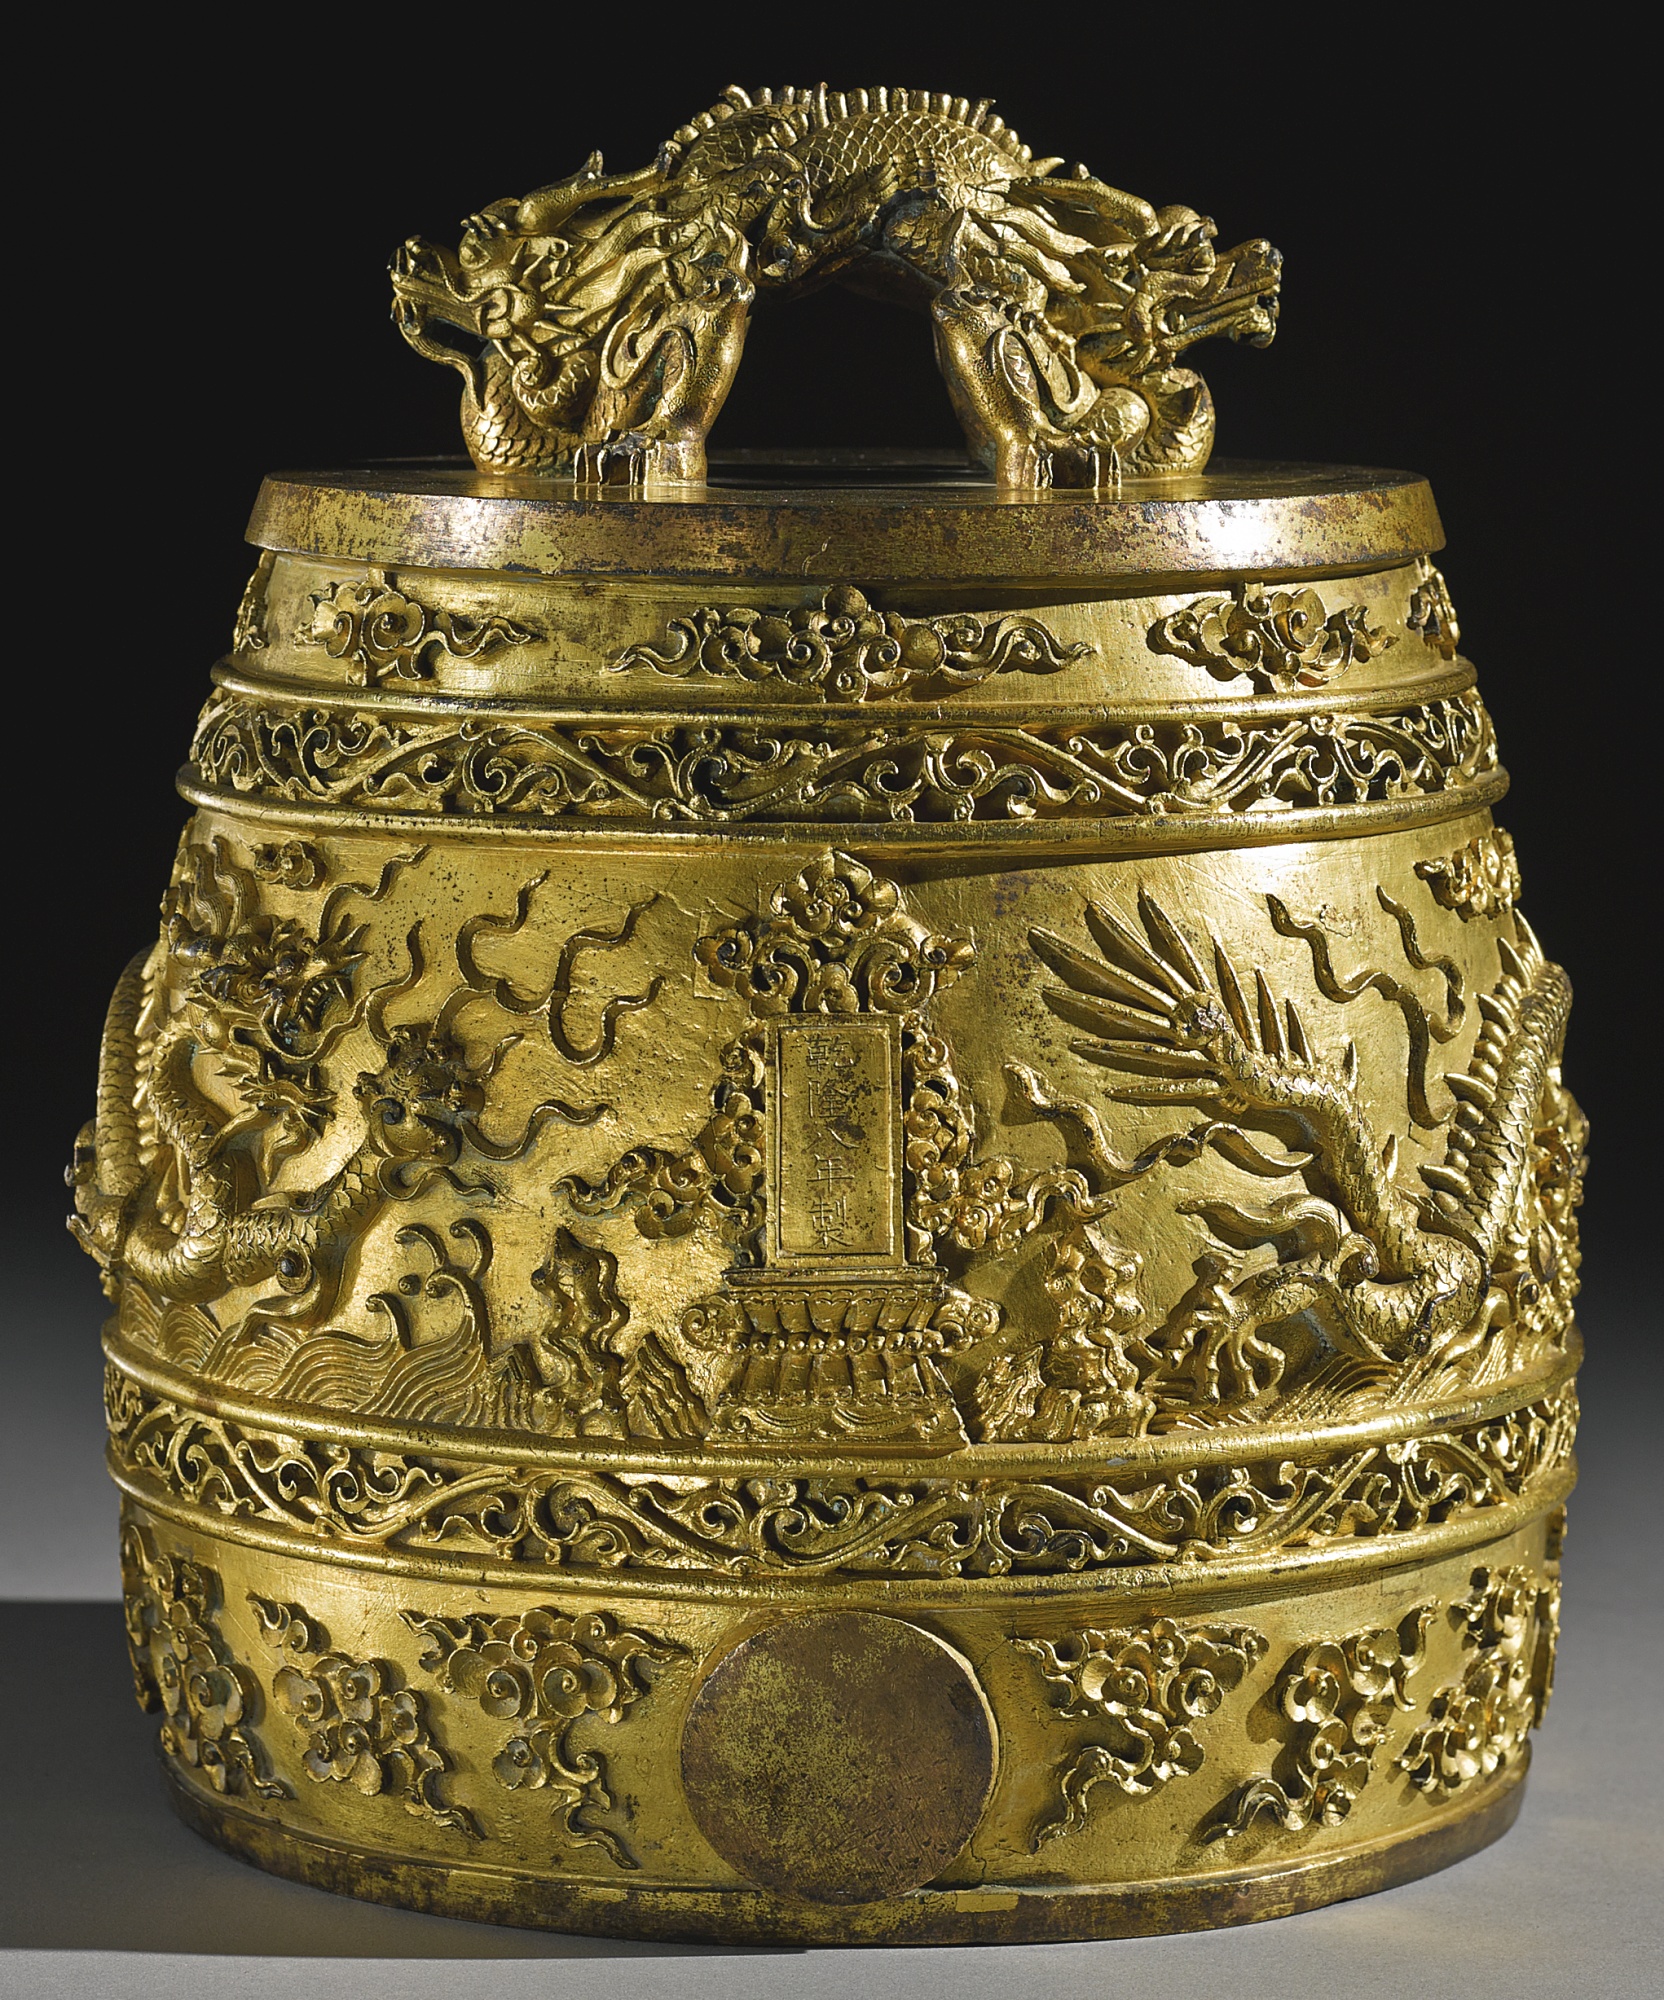 A Rare and Important Imperial Gilt-Bronze Ritual Bell (Bianzhong)